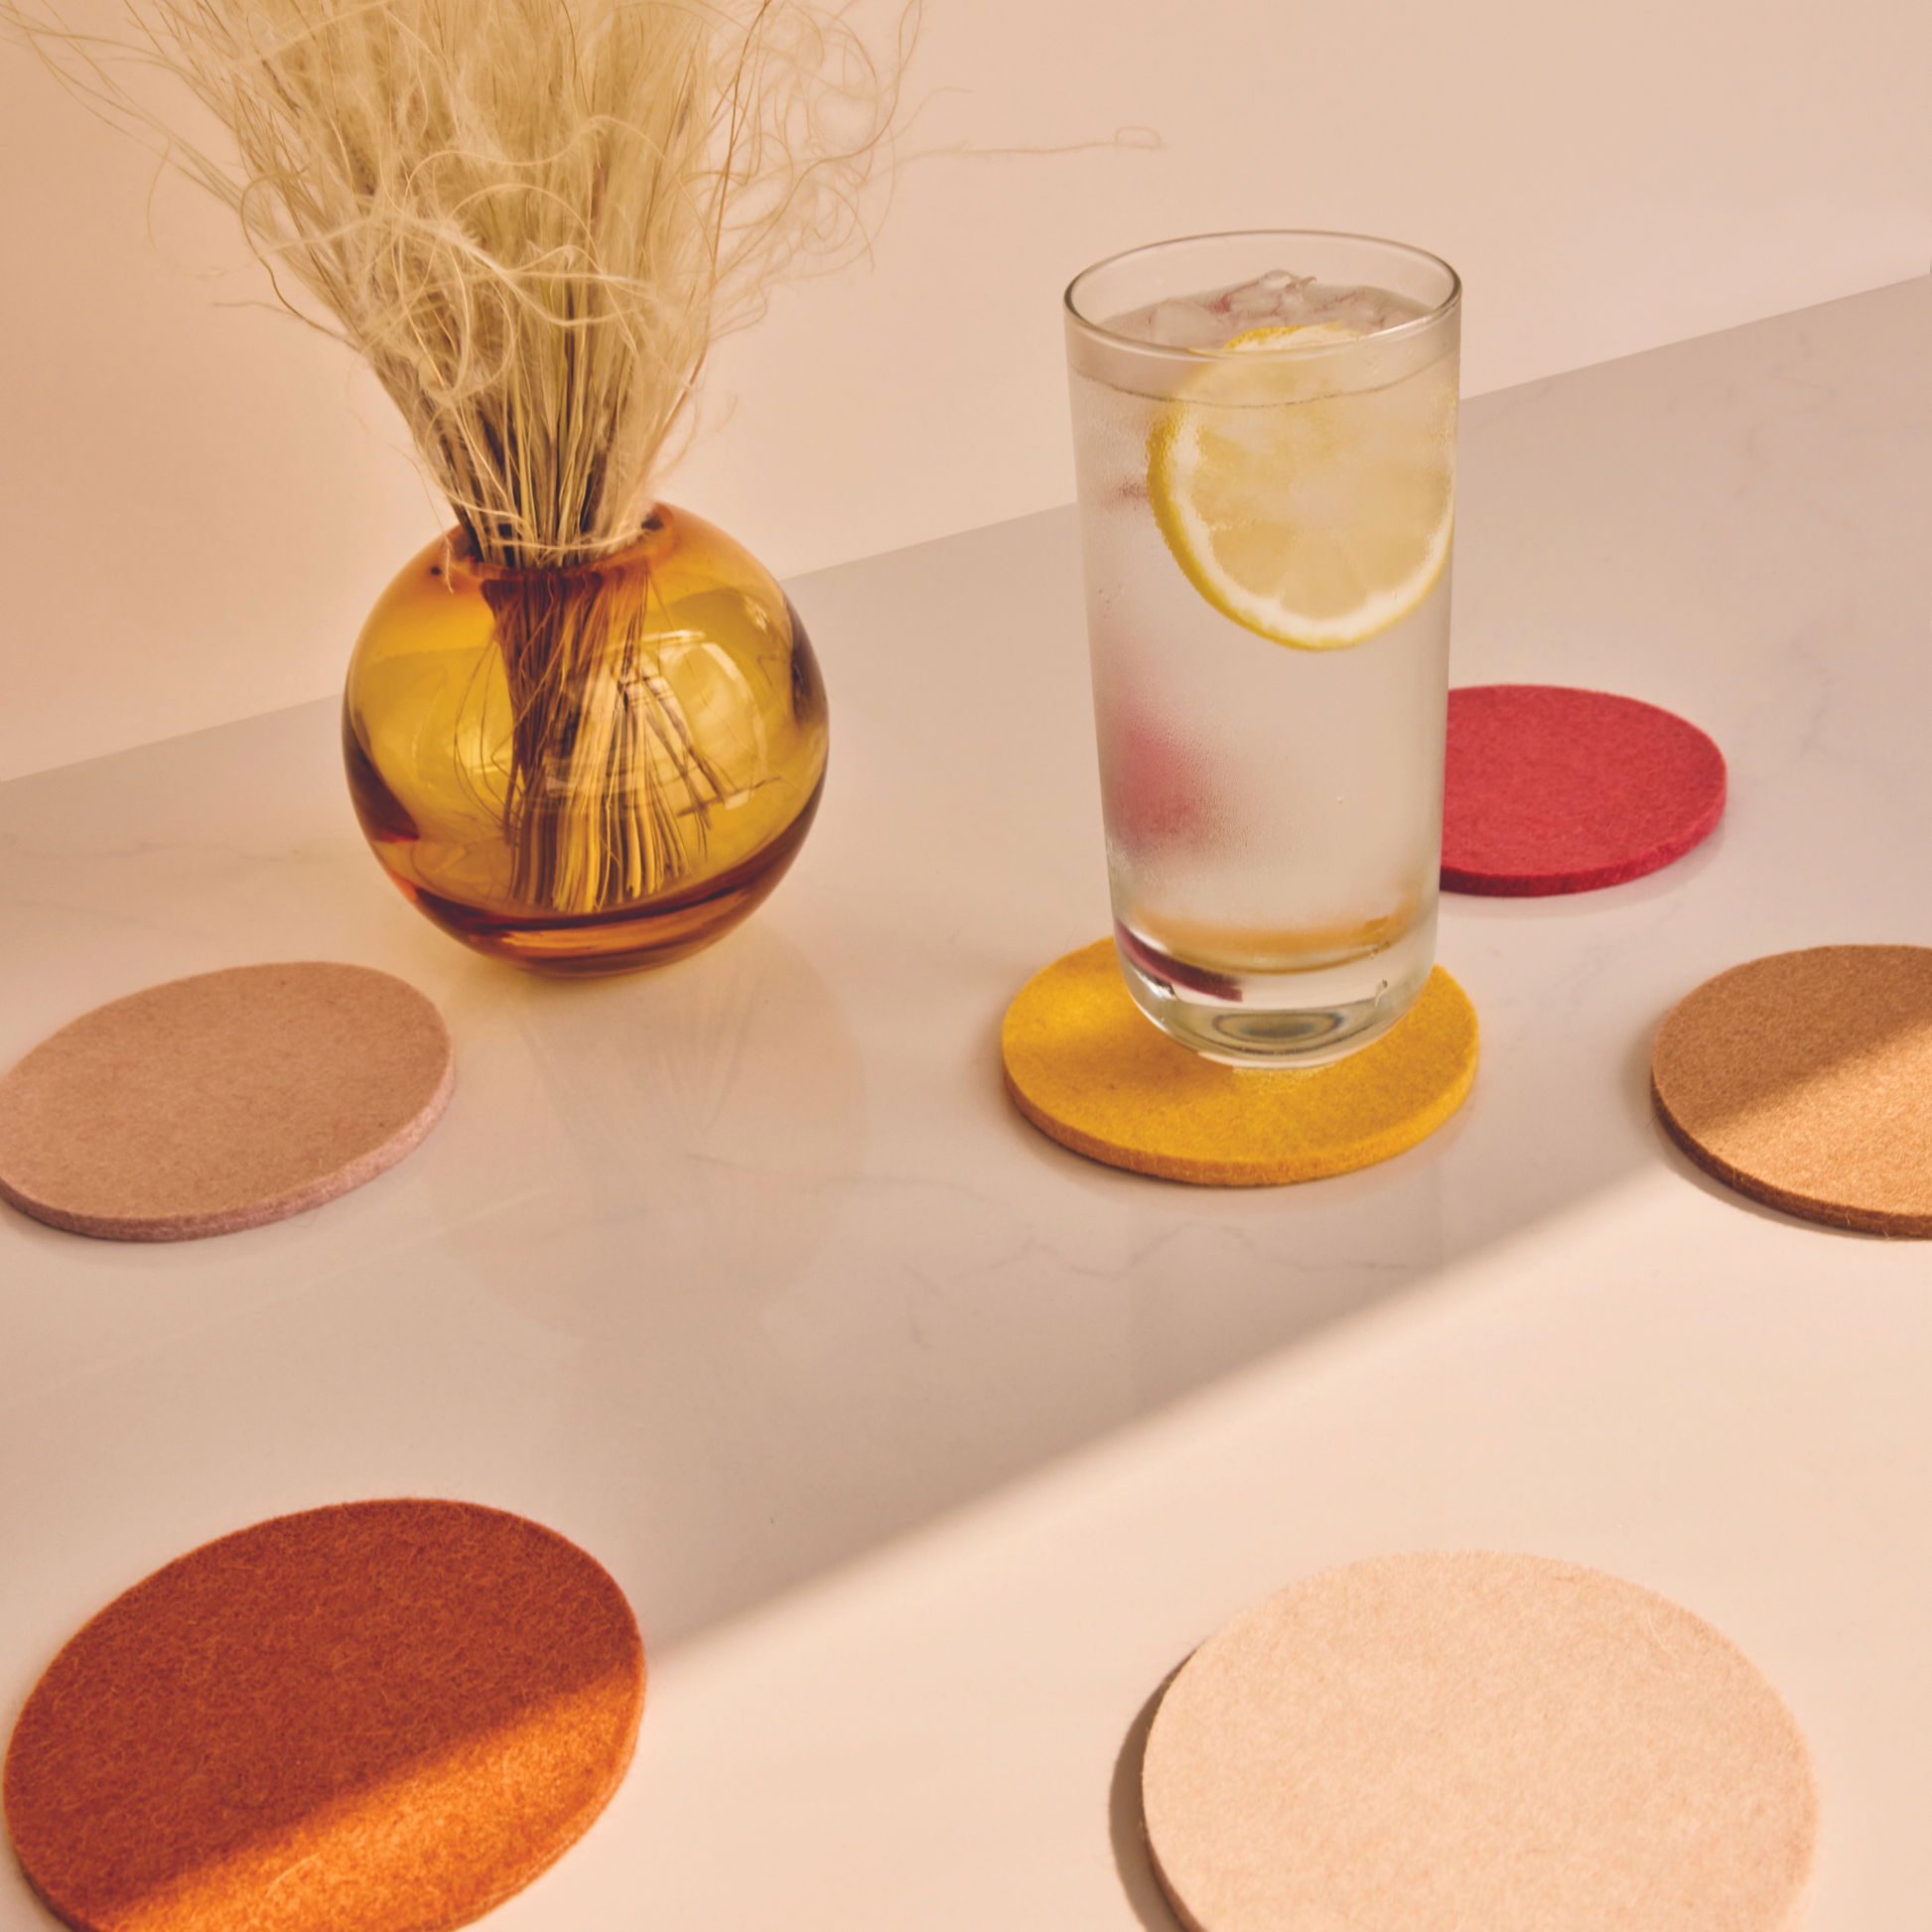 coasters with a drink on one of them